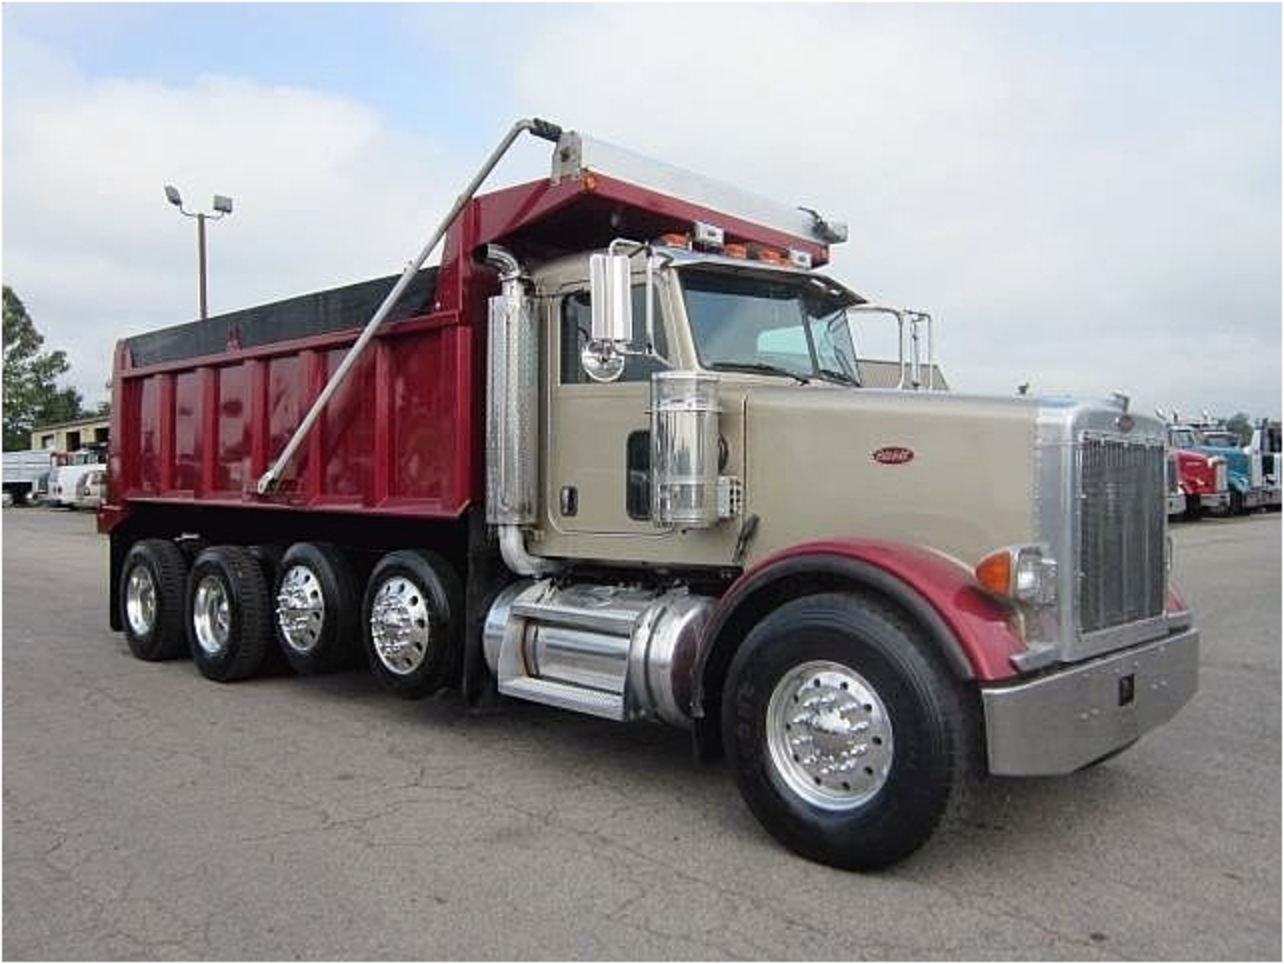 Used 357 29 machines for sale. Find Peterbilt, 1999 and more.